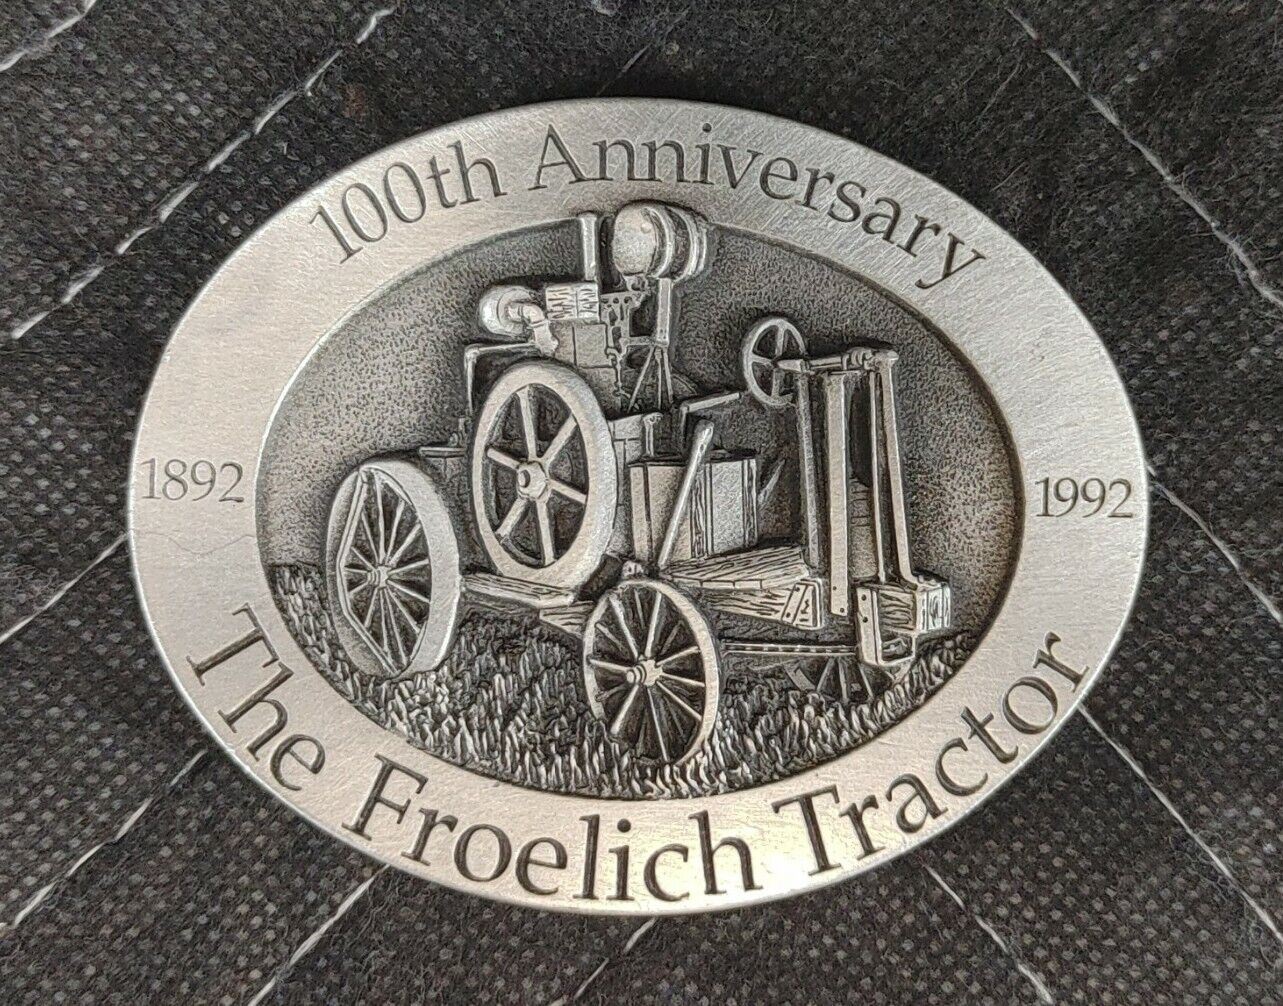 vtg limited Froelich Tractor 100th Aniversary Deere & Company PEWTER BELT BUCKLE